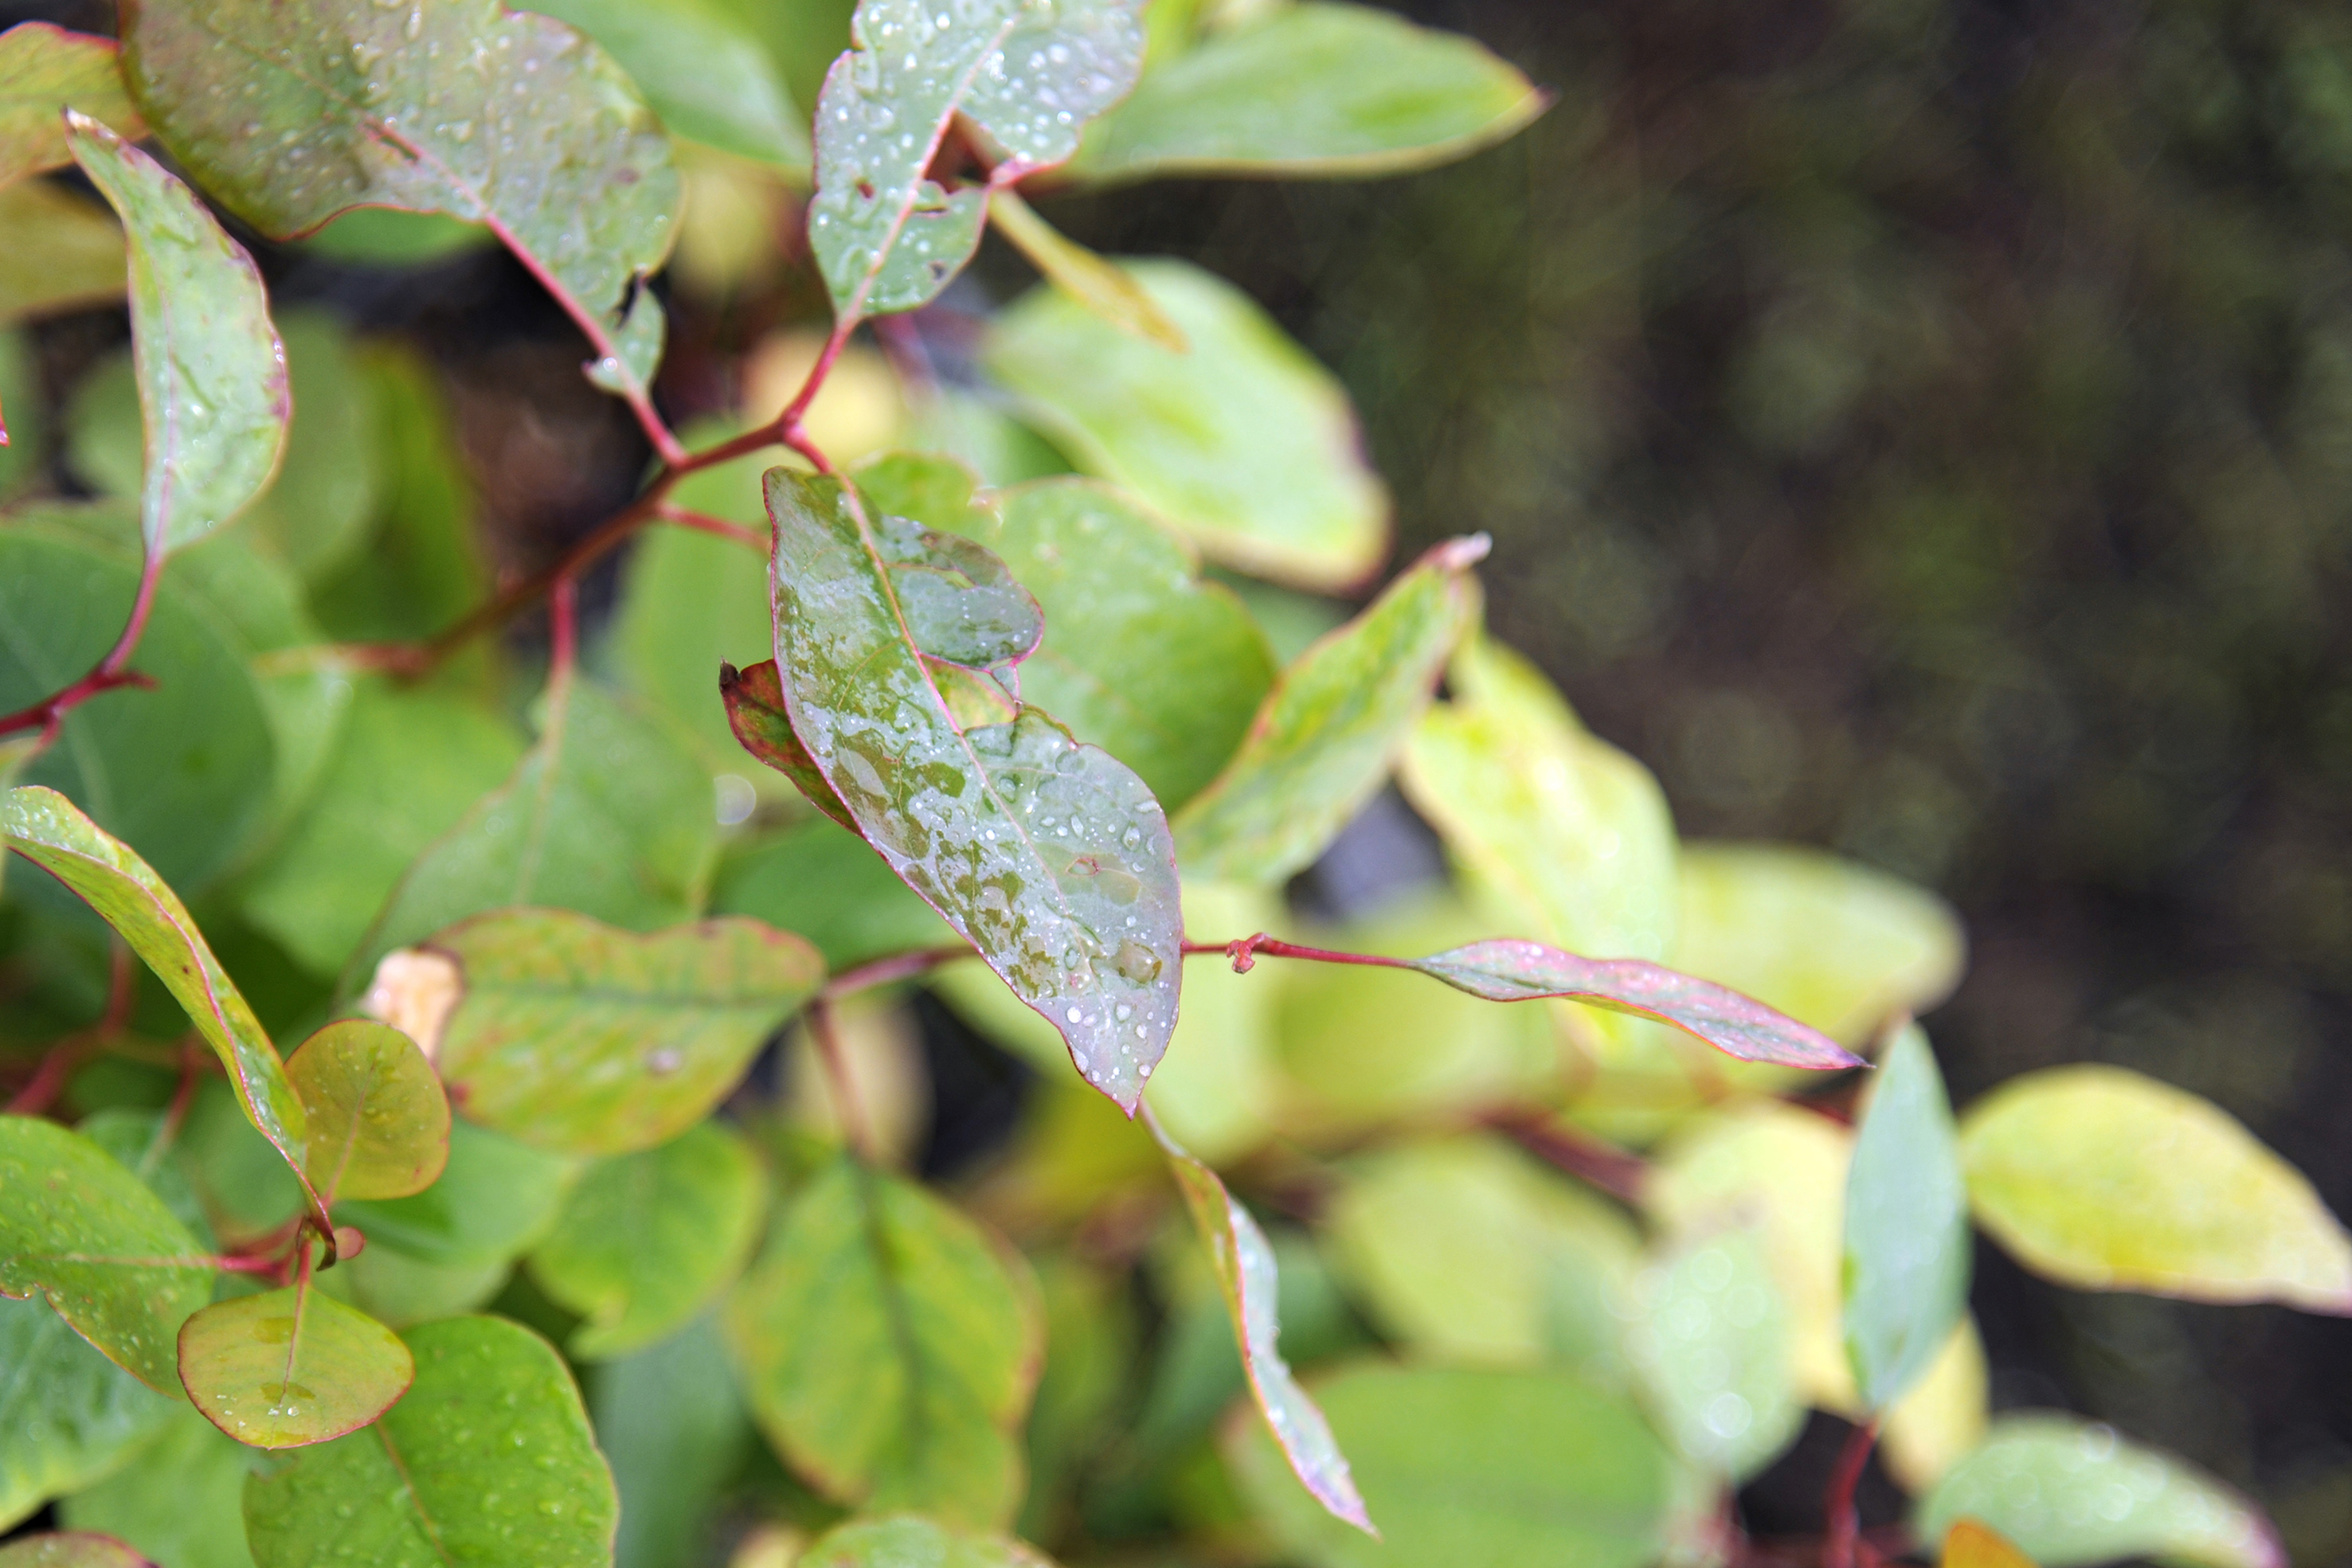 A close-up of leaves covered in dew.